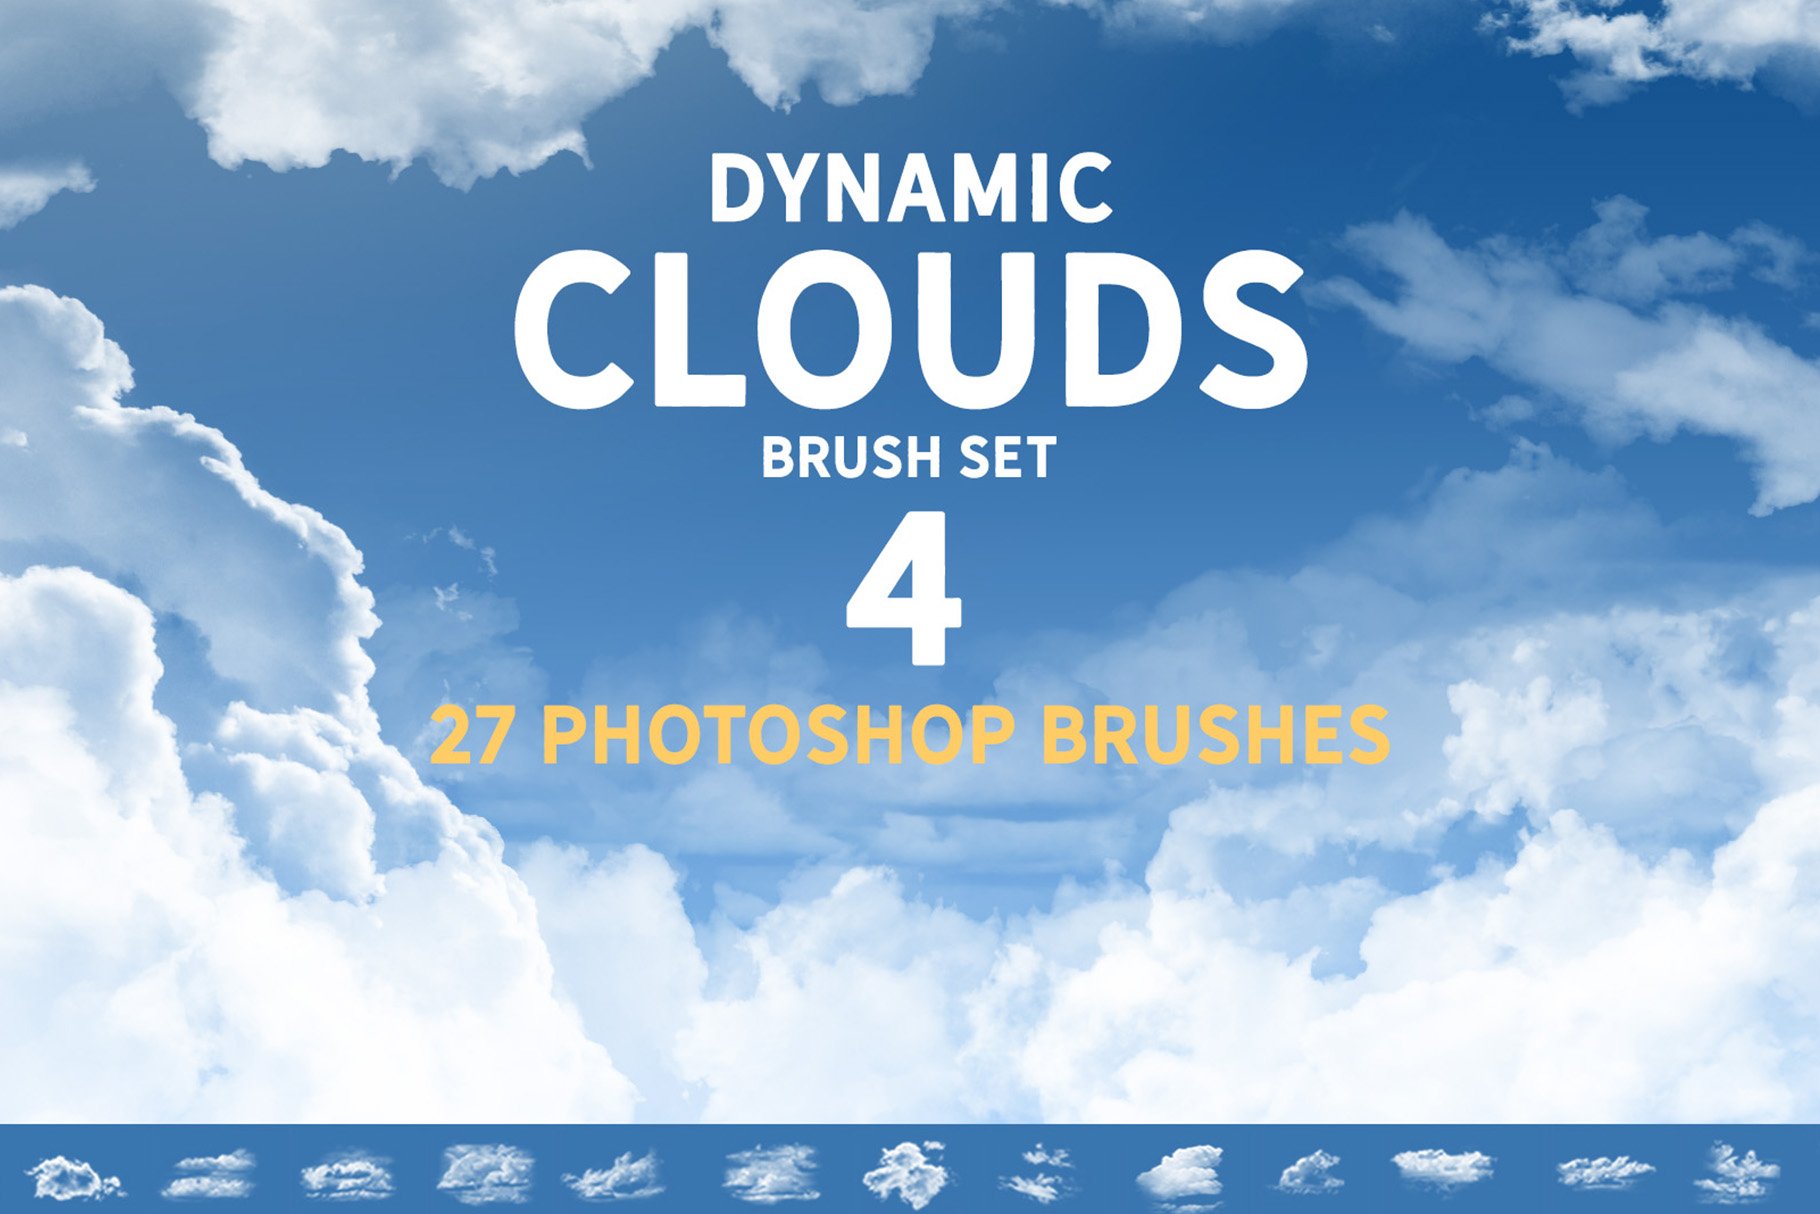 Dynamic Clouds Brush set 4cover image.